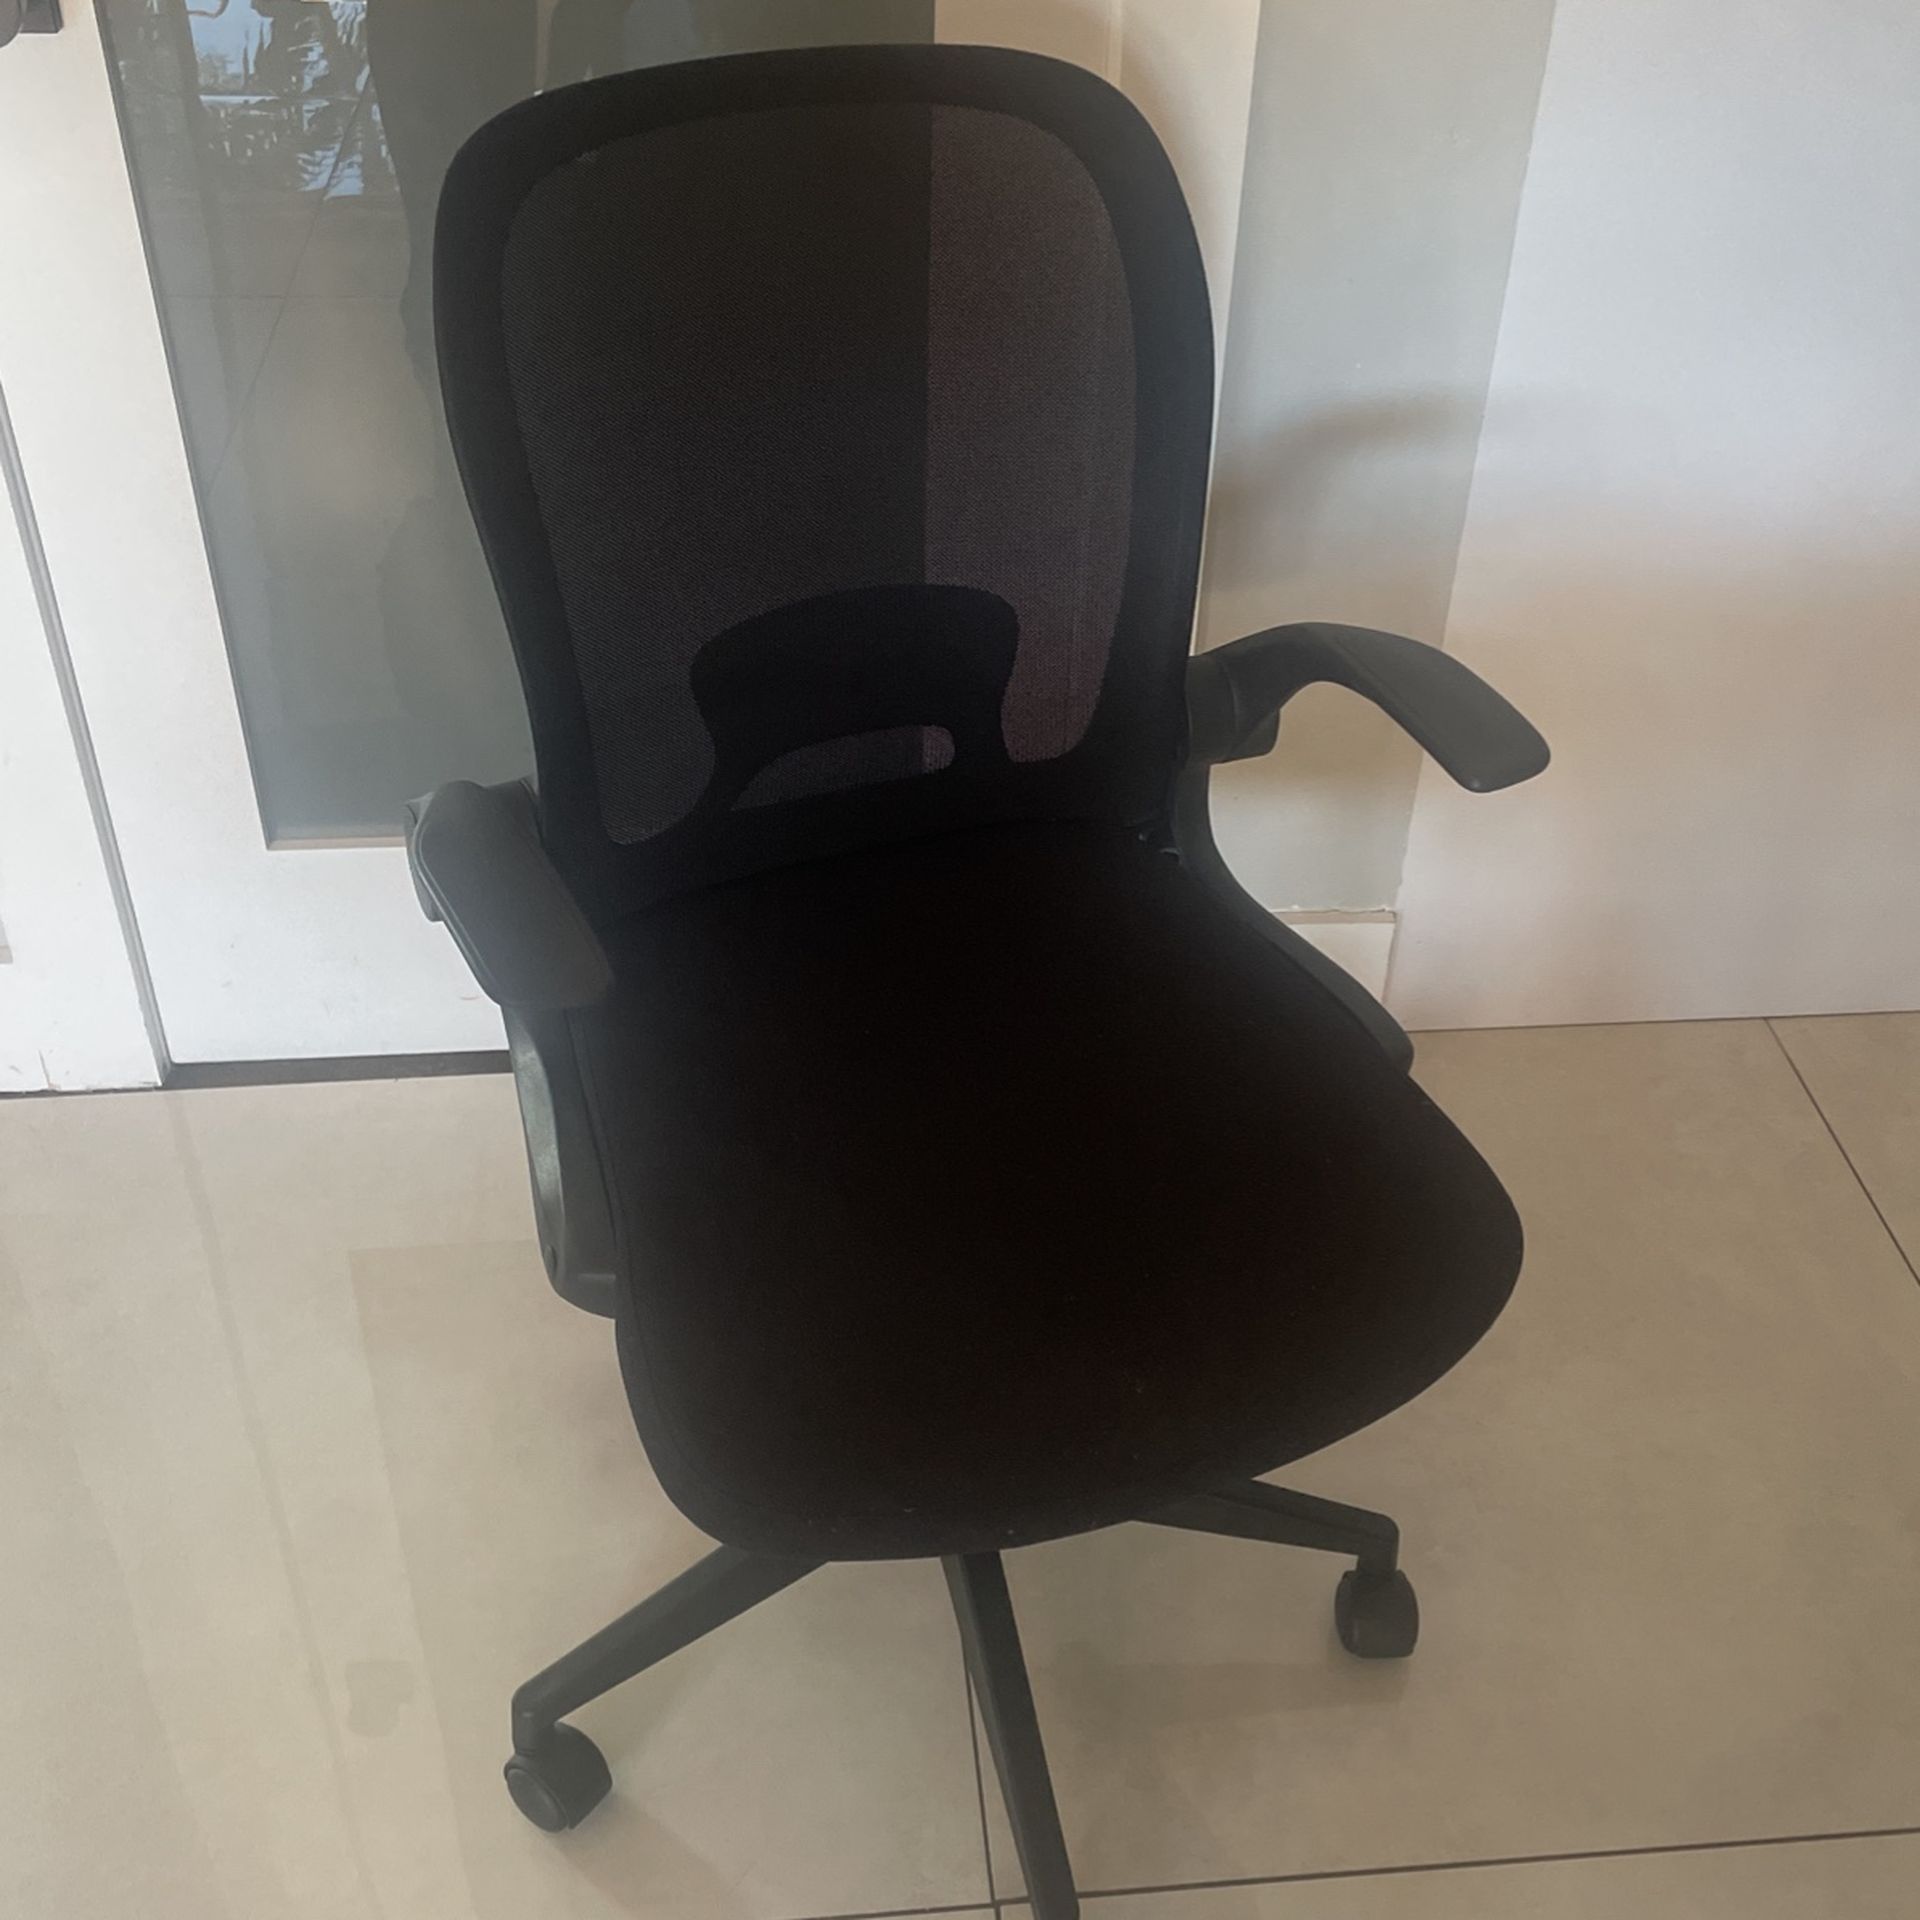 Foldable office chair